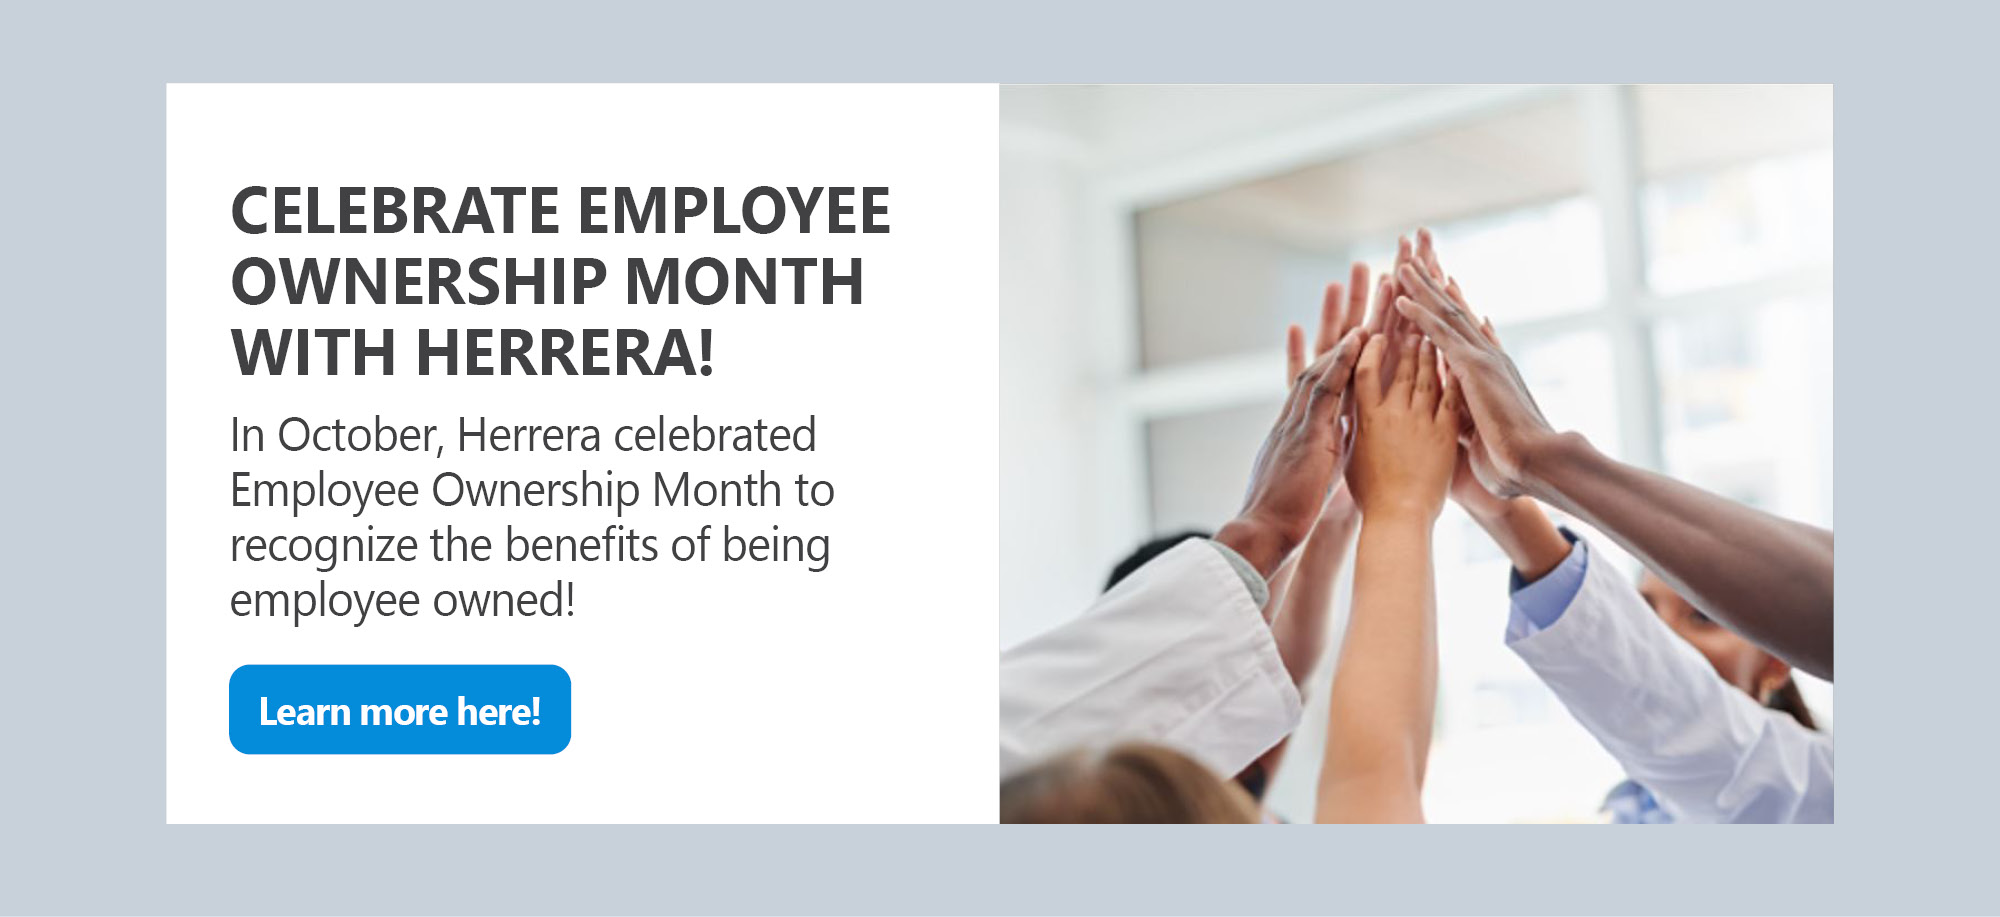 Q4-employee-ownership-month-22